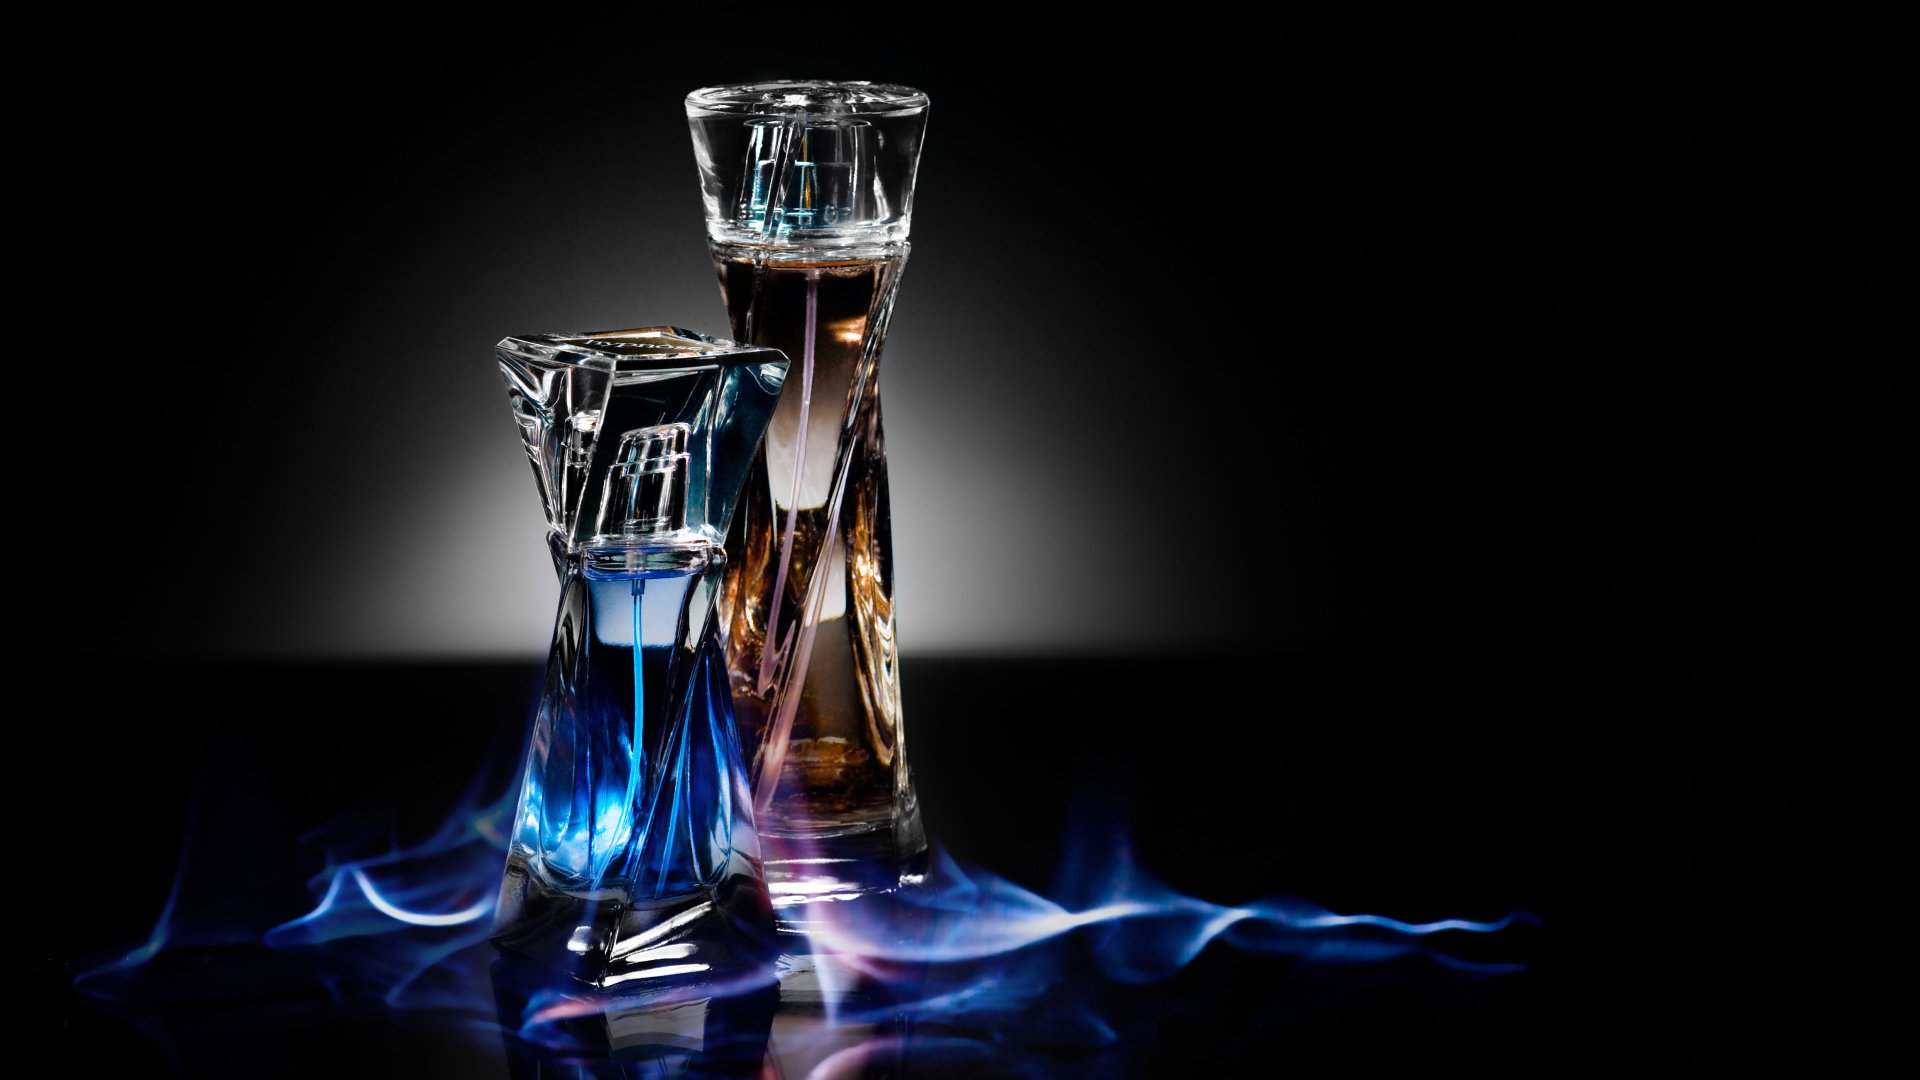 Perfume Background Photos Download The BEST Free Perfume Background Stock  Photos  HD Images